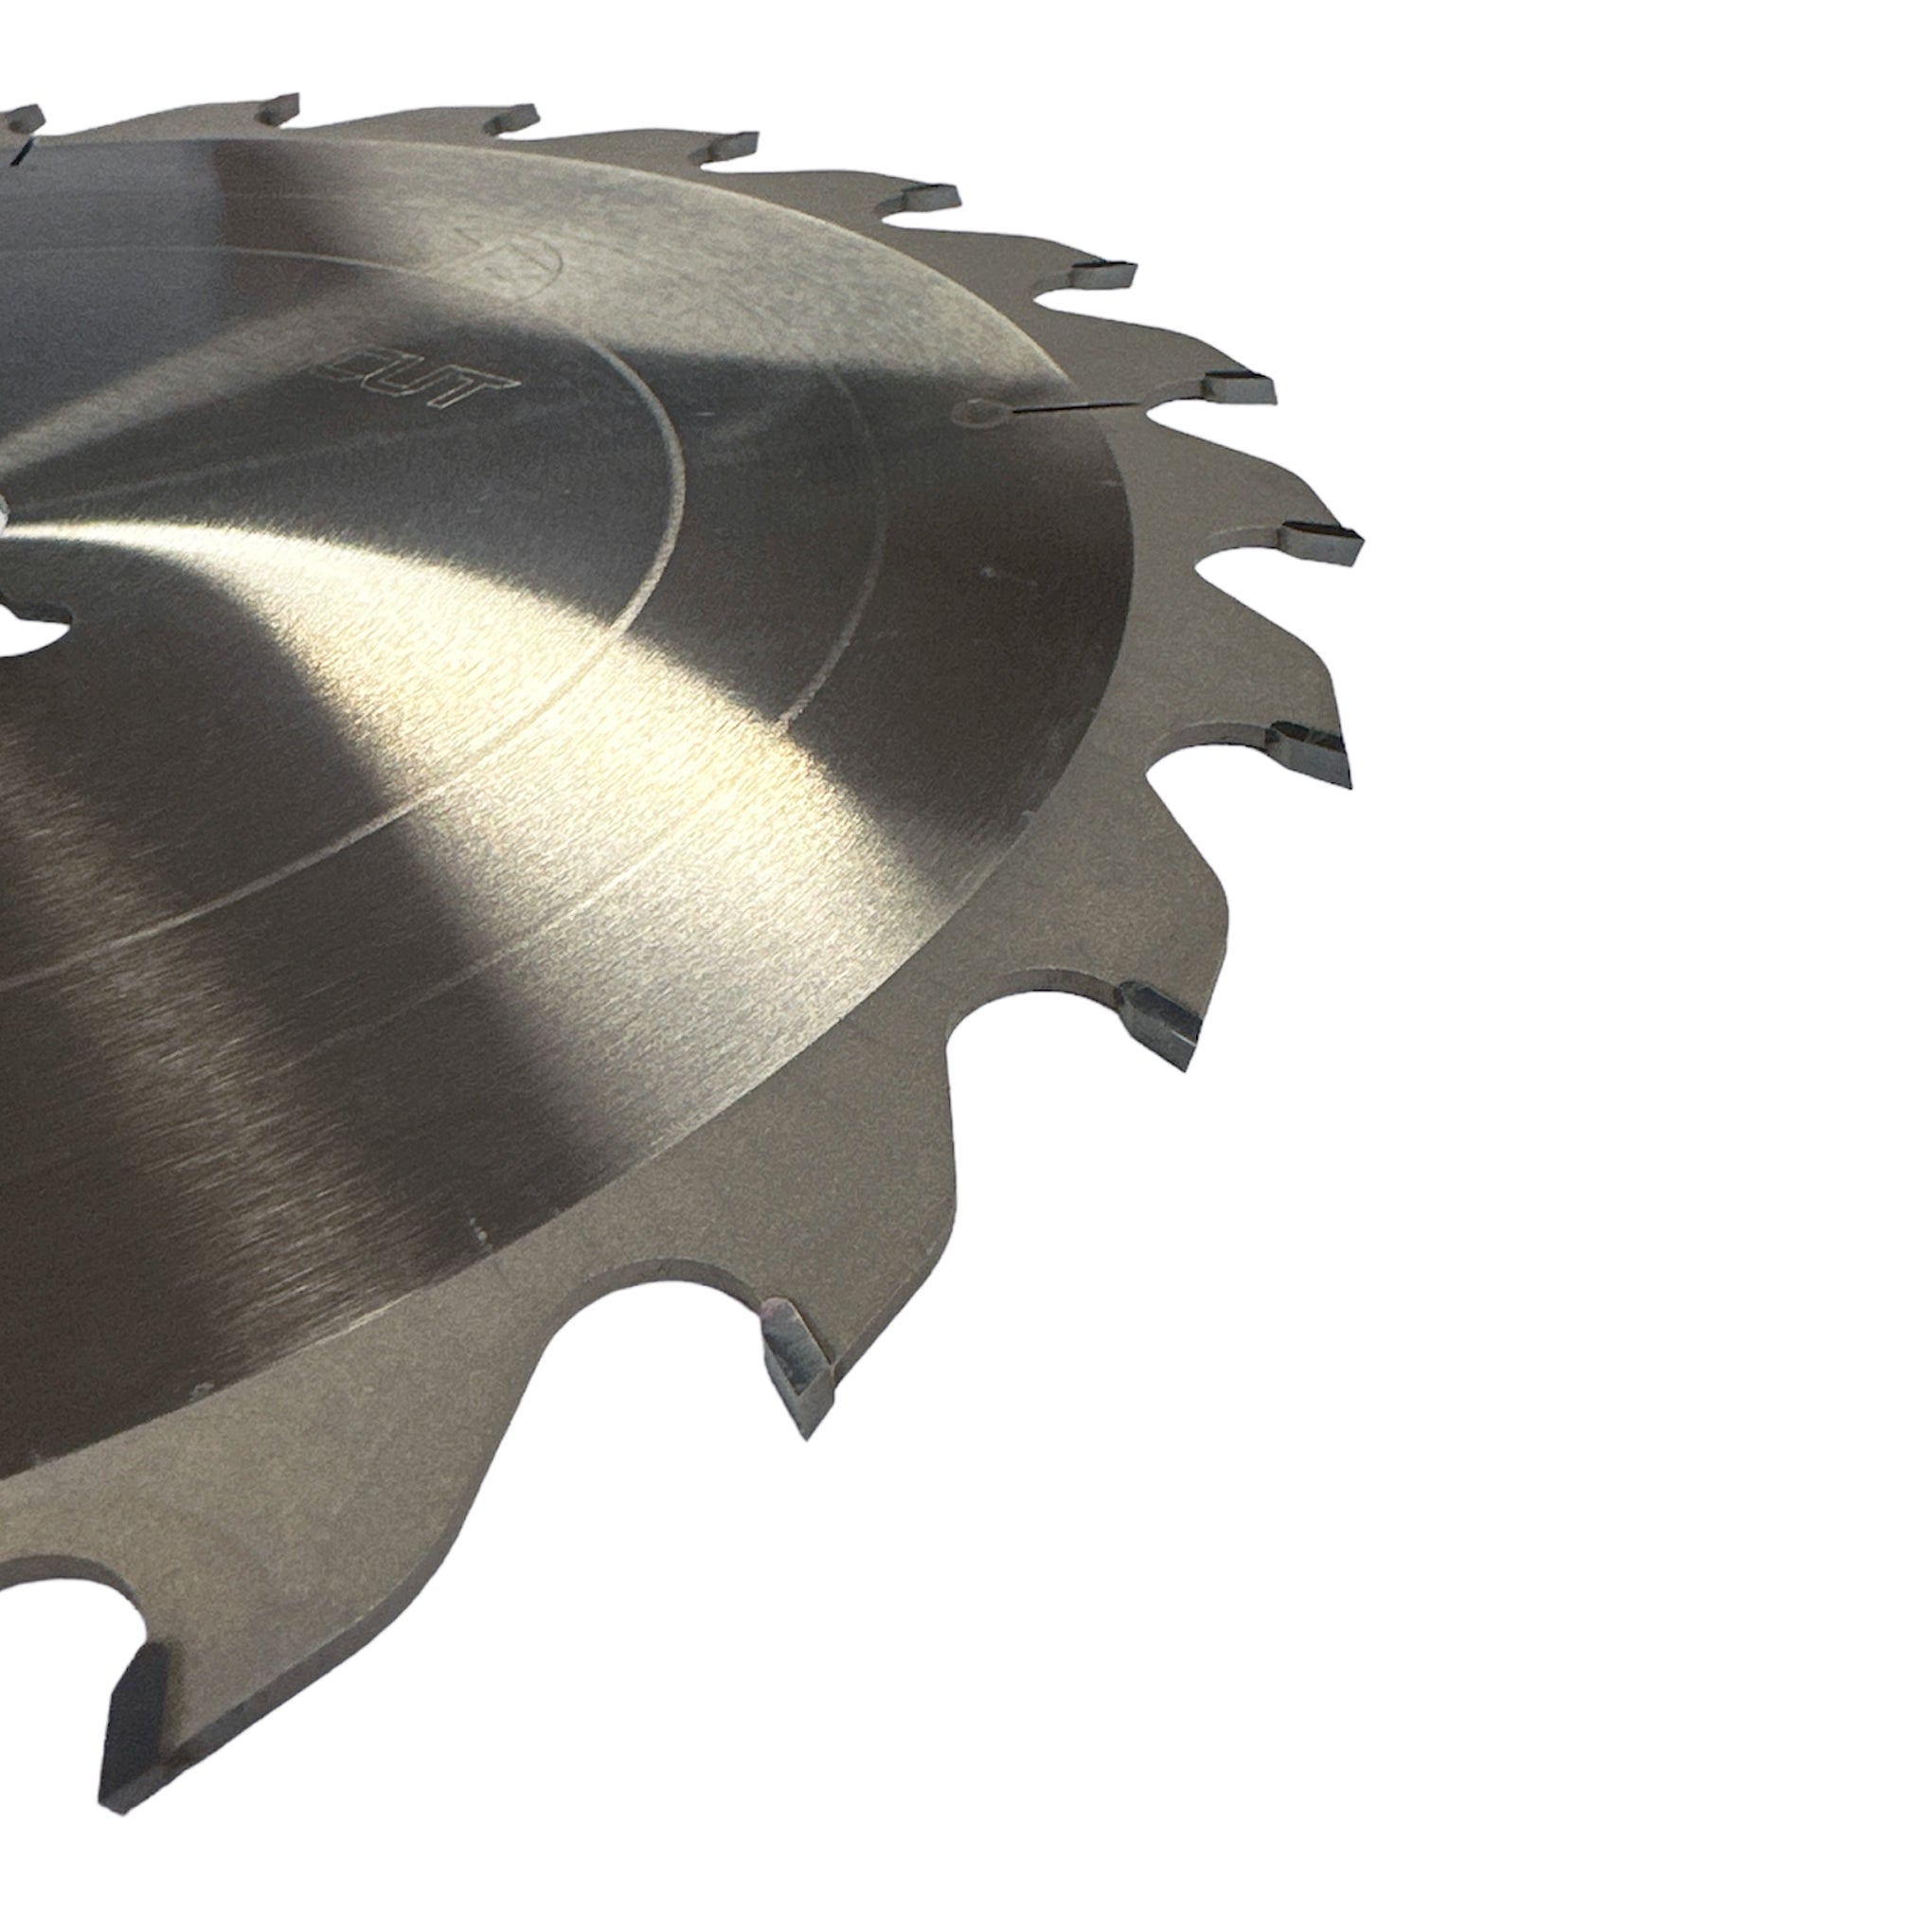 300mm x 30mm x 24T Tungsten Carbide Tipped ATB Circular Saw Blade suit Ripping by ToughCut